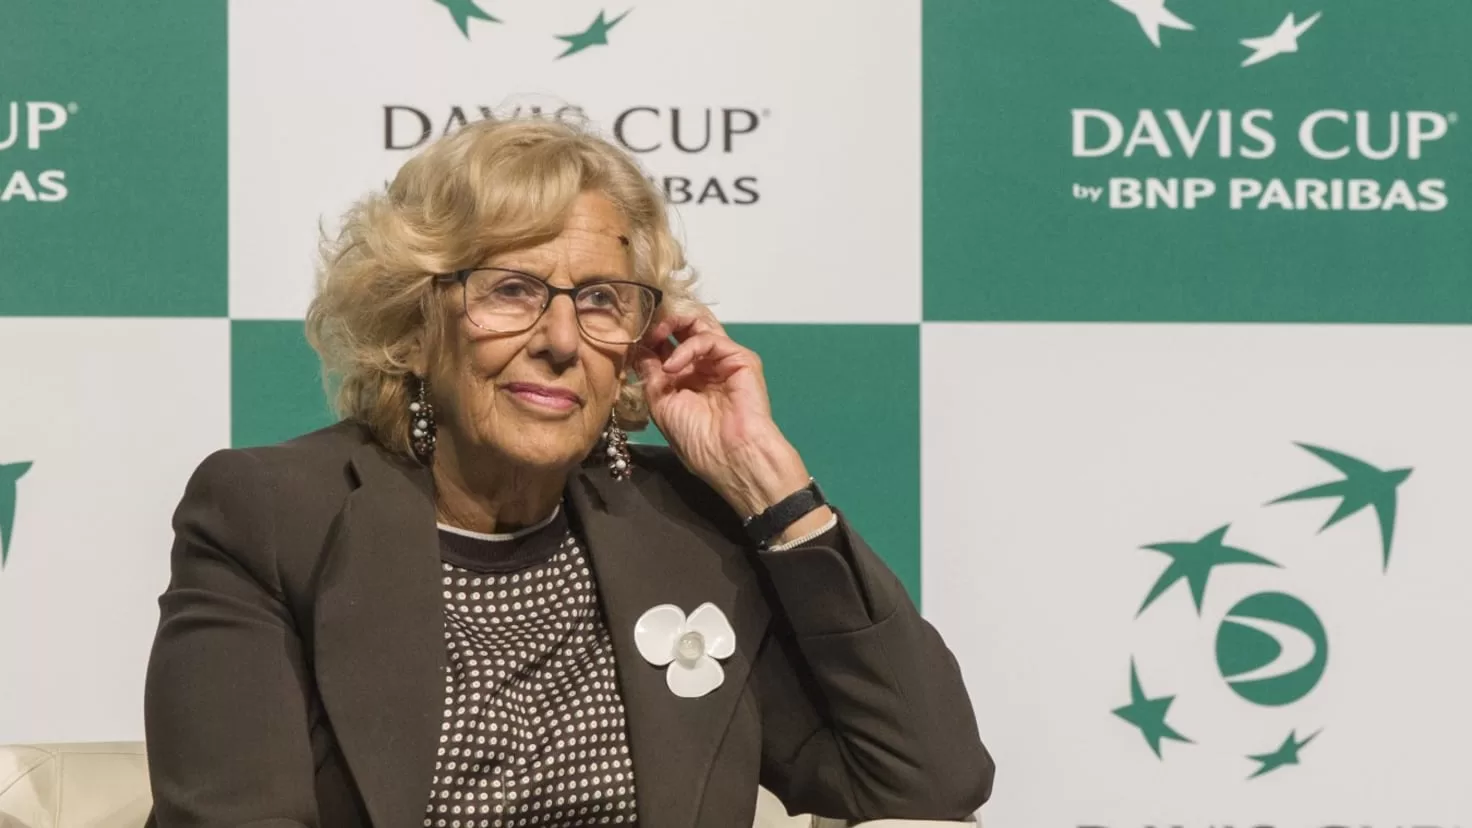 Manuela Carmena and her vision of relationships: Monogamy is absurd
